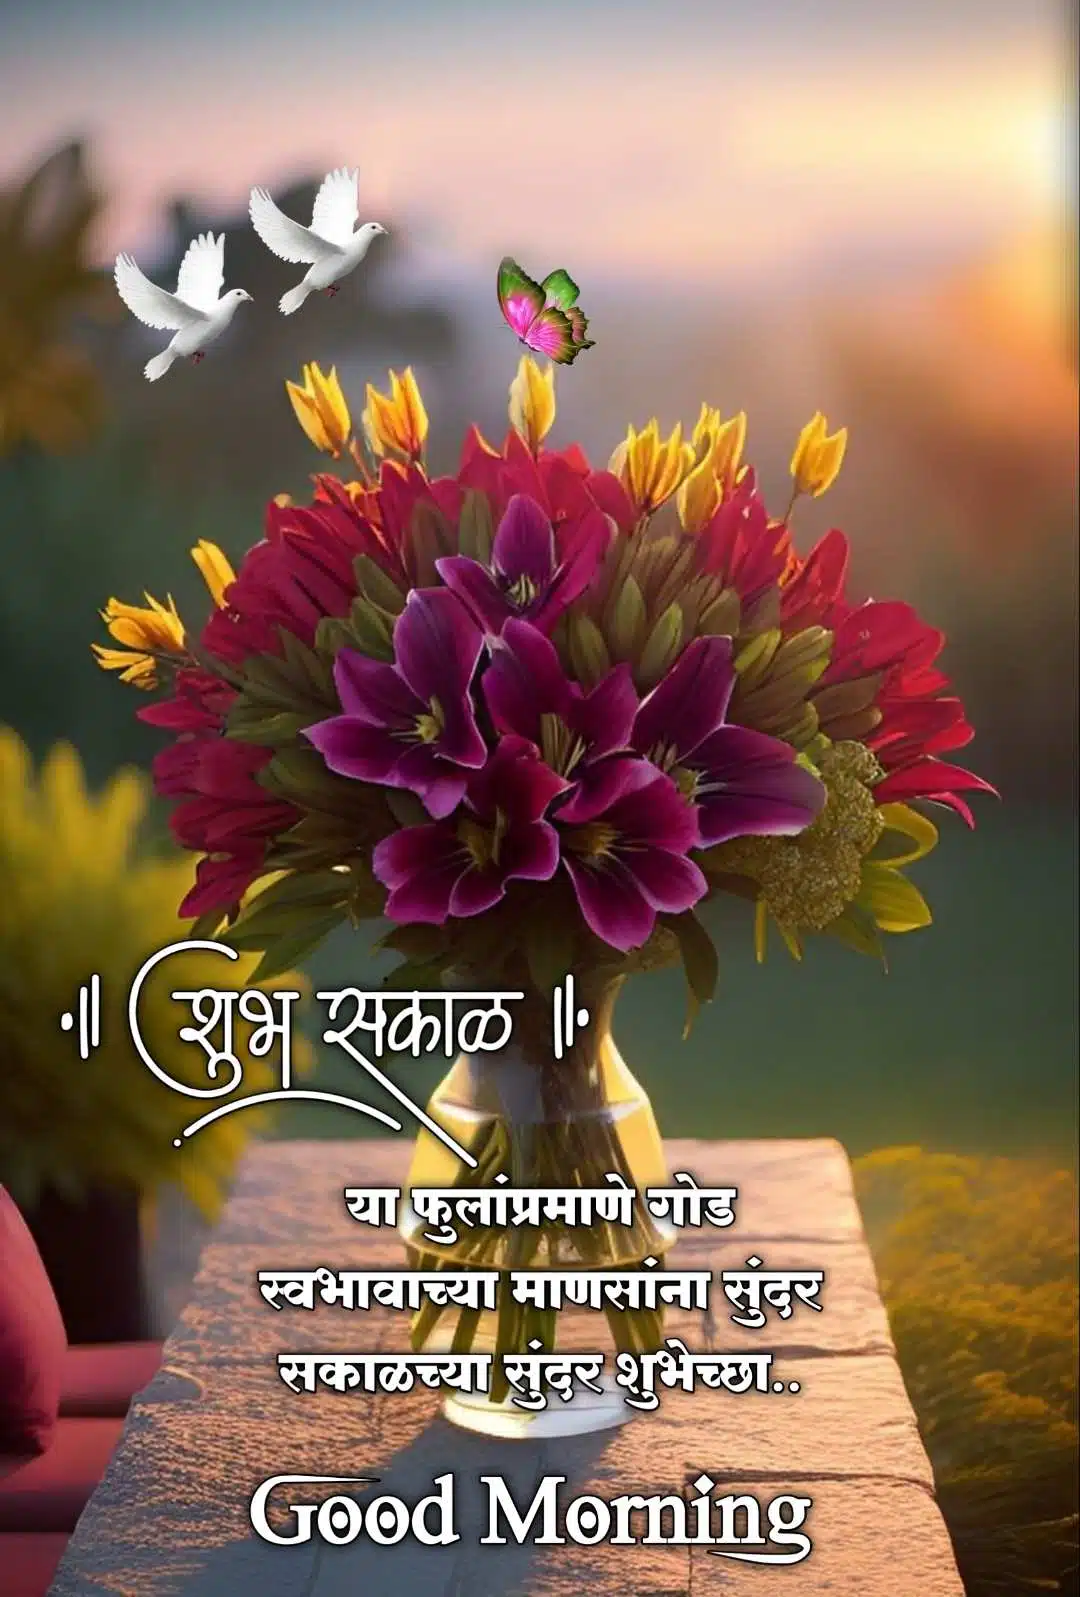 Good Morning Flowers quotes in Marathi